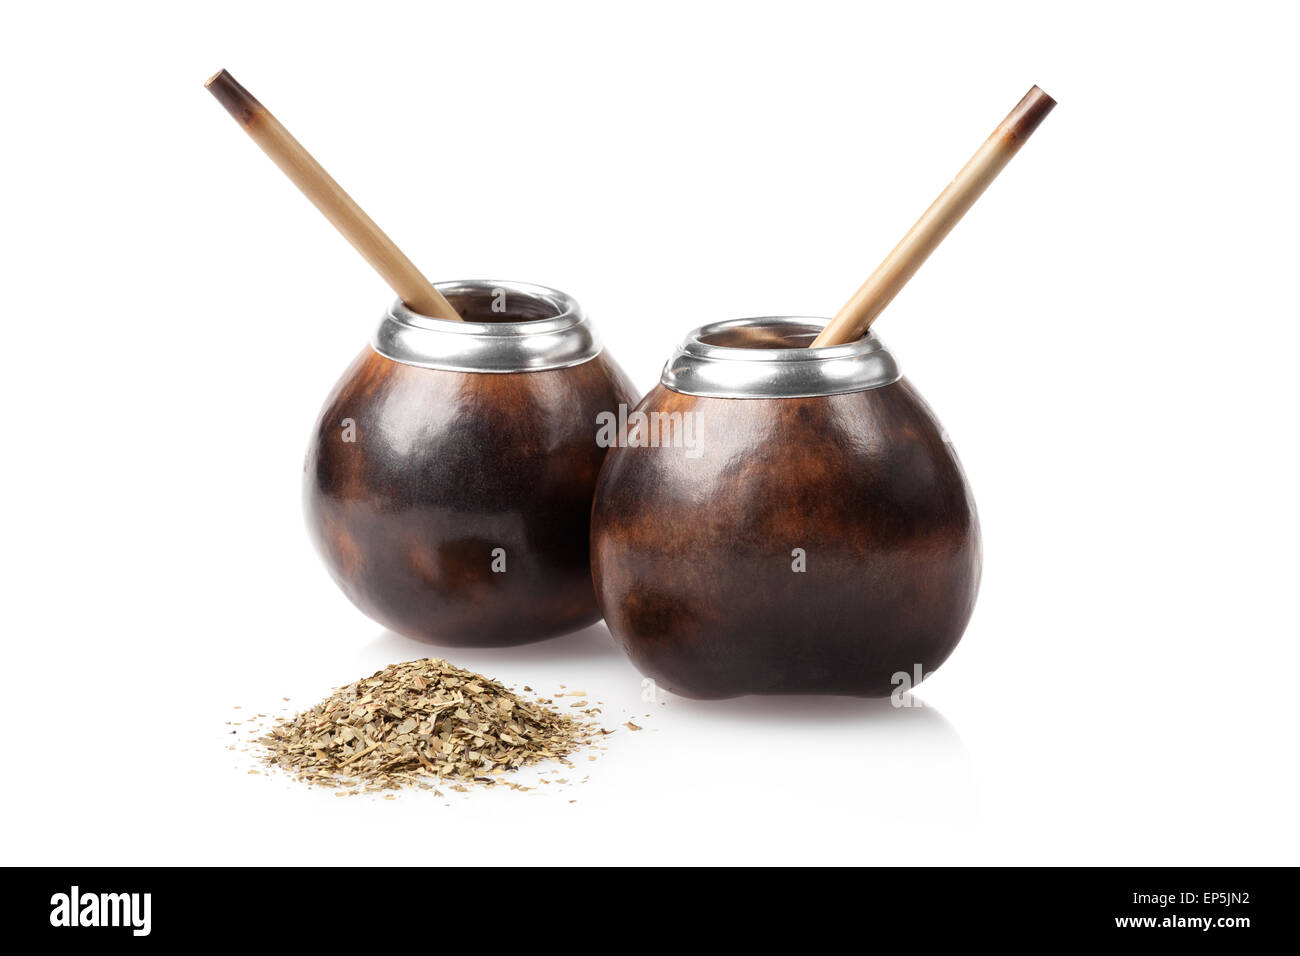 Deux calebasses avec yerba mate isolated on white Banque D'Images